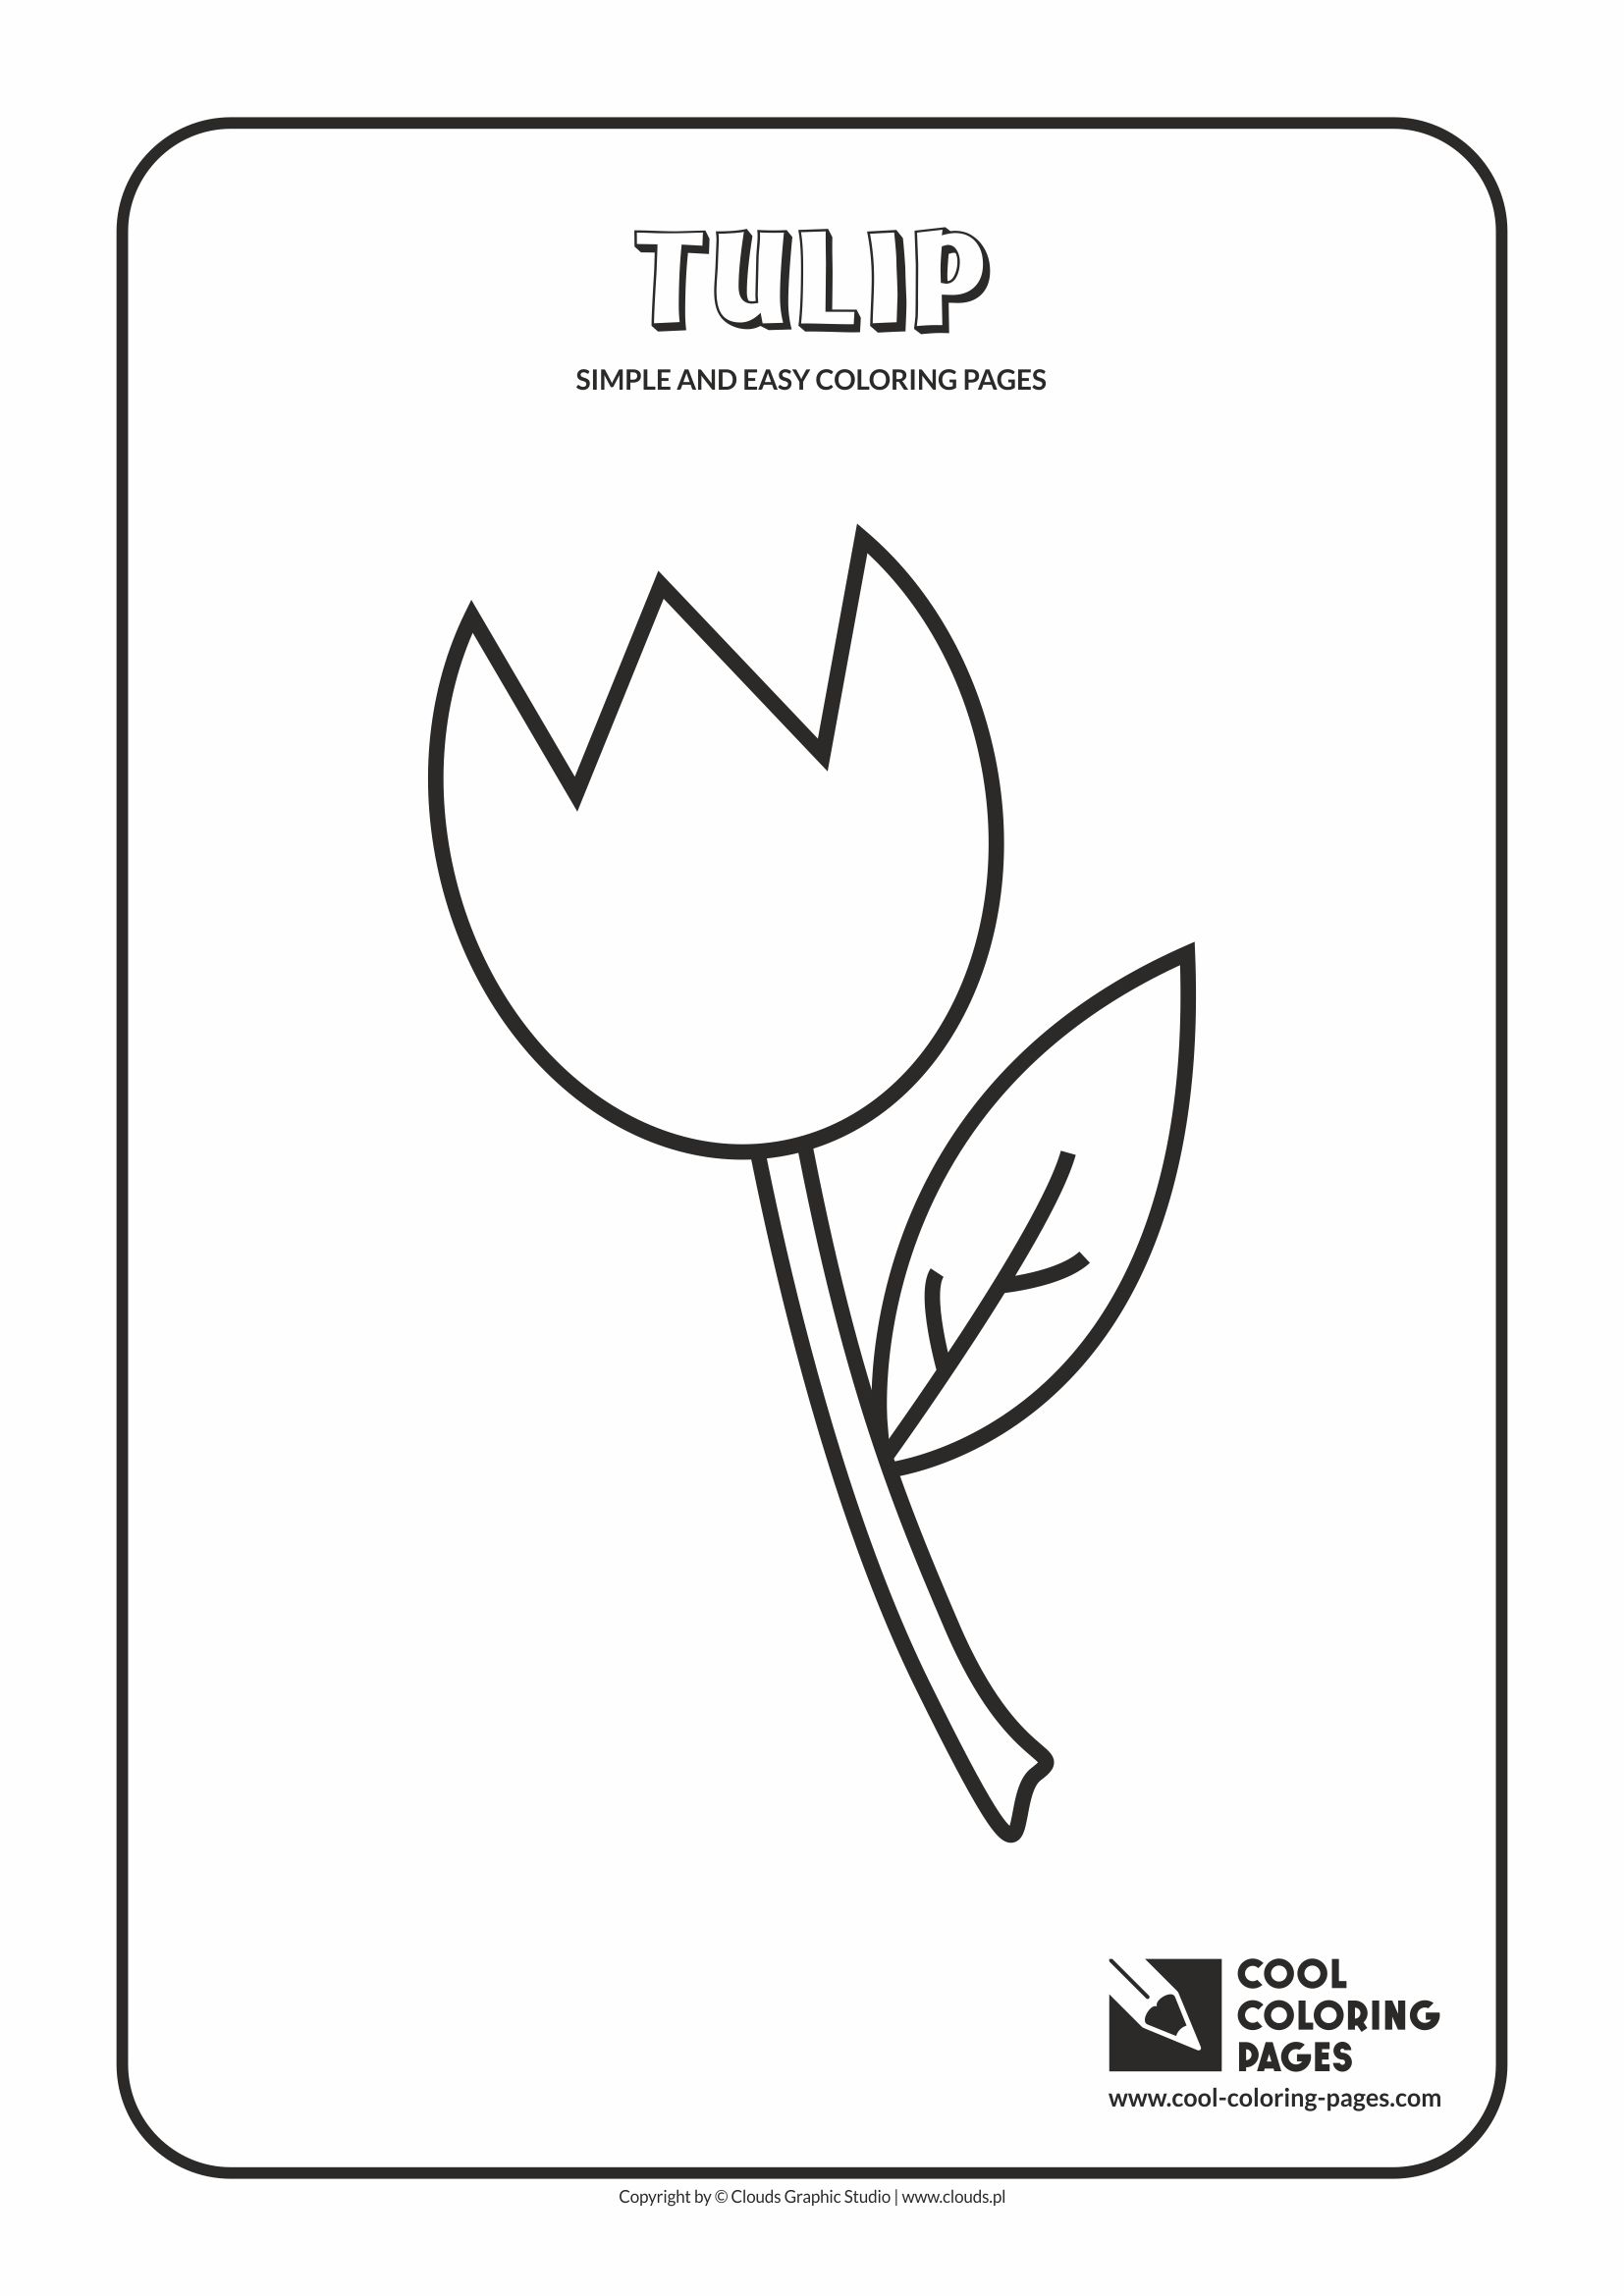 Simple and easy coloring pages for toddlers - Tulip